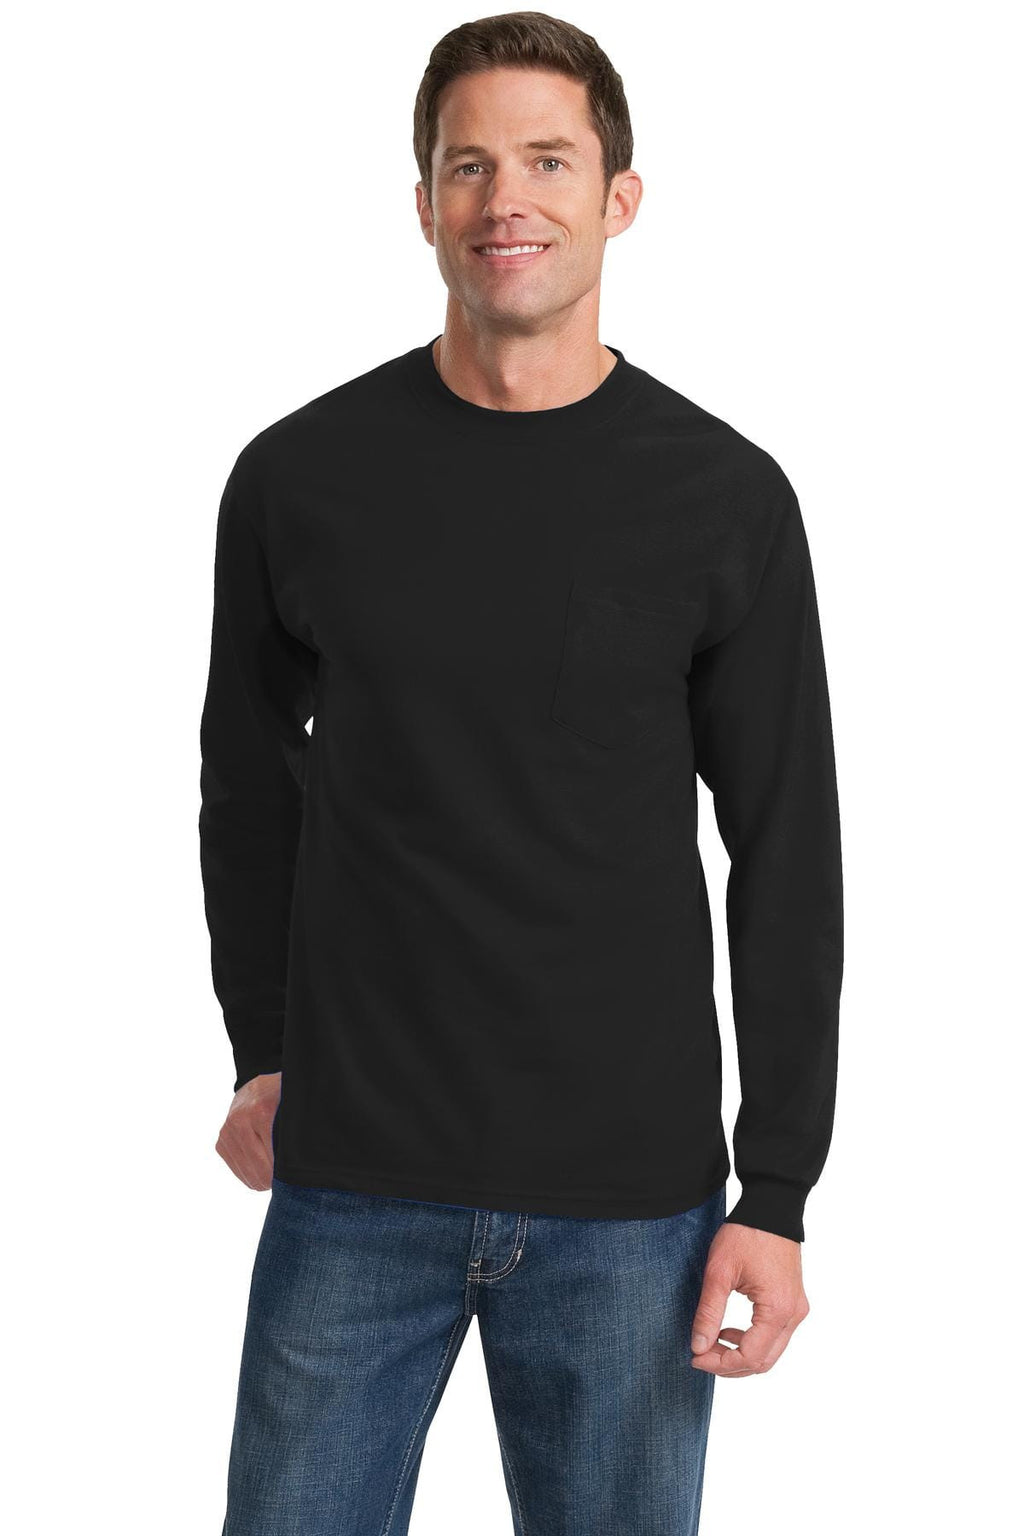 Port & Company Tall Long Sleeve Essential T-Shirt with Pocket